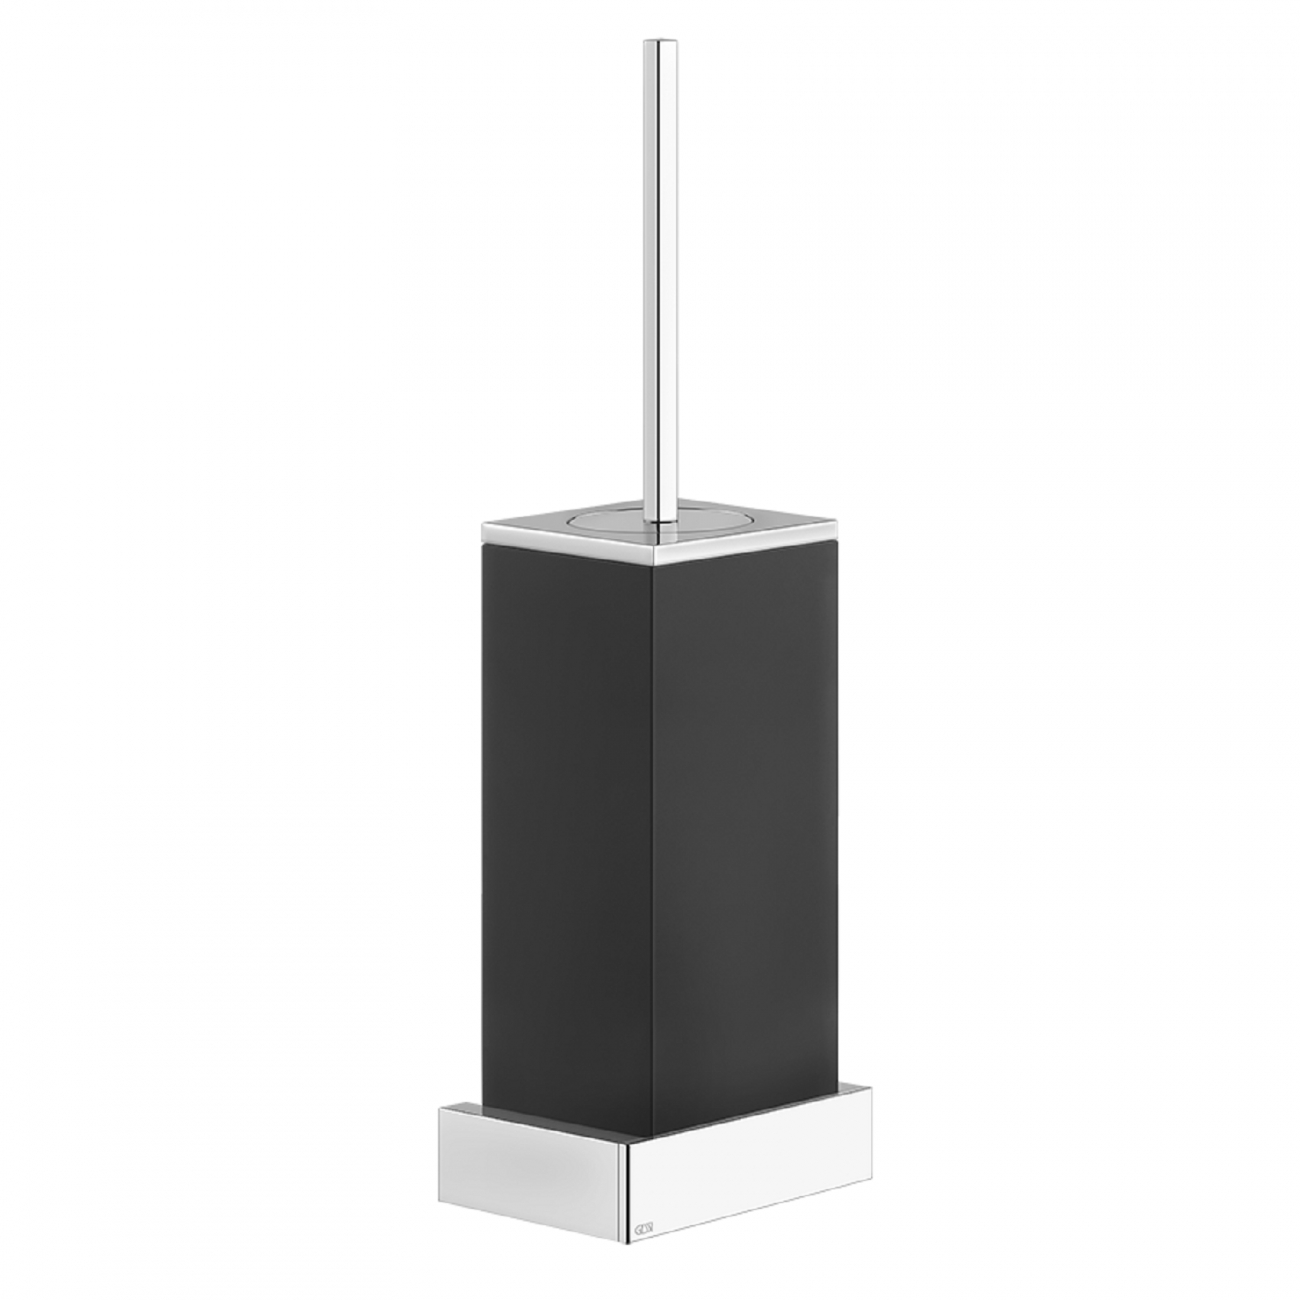 GESSI RETTANGOLO ACCESSORIES WALL MOUNTED BRUSH HOLDER